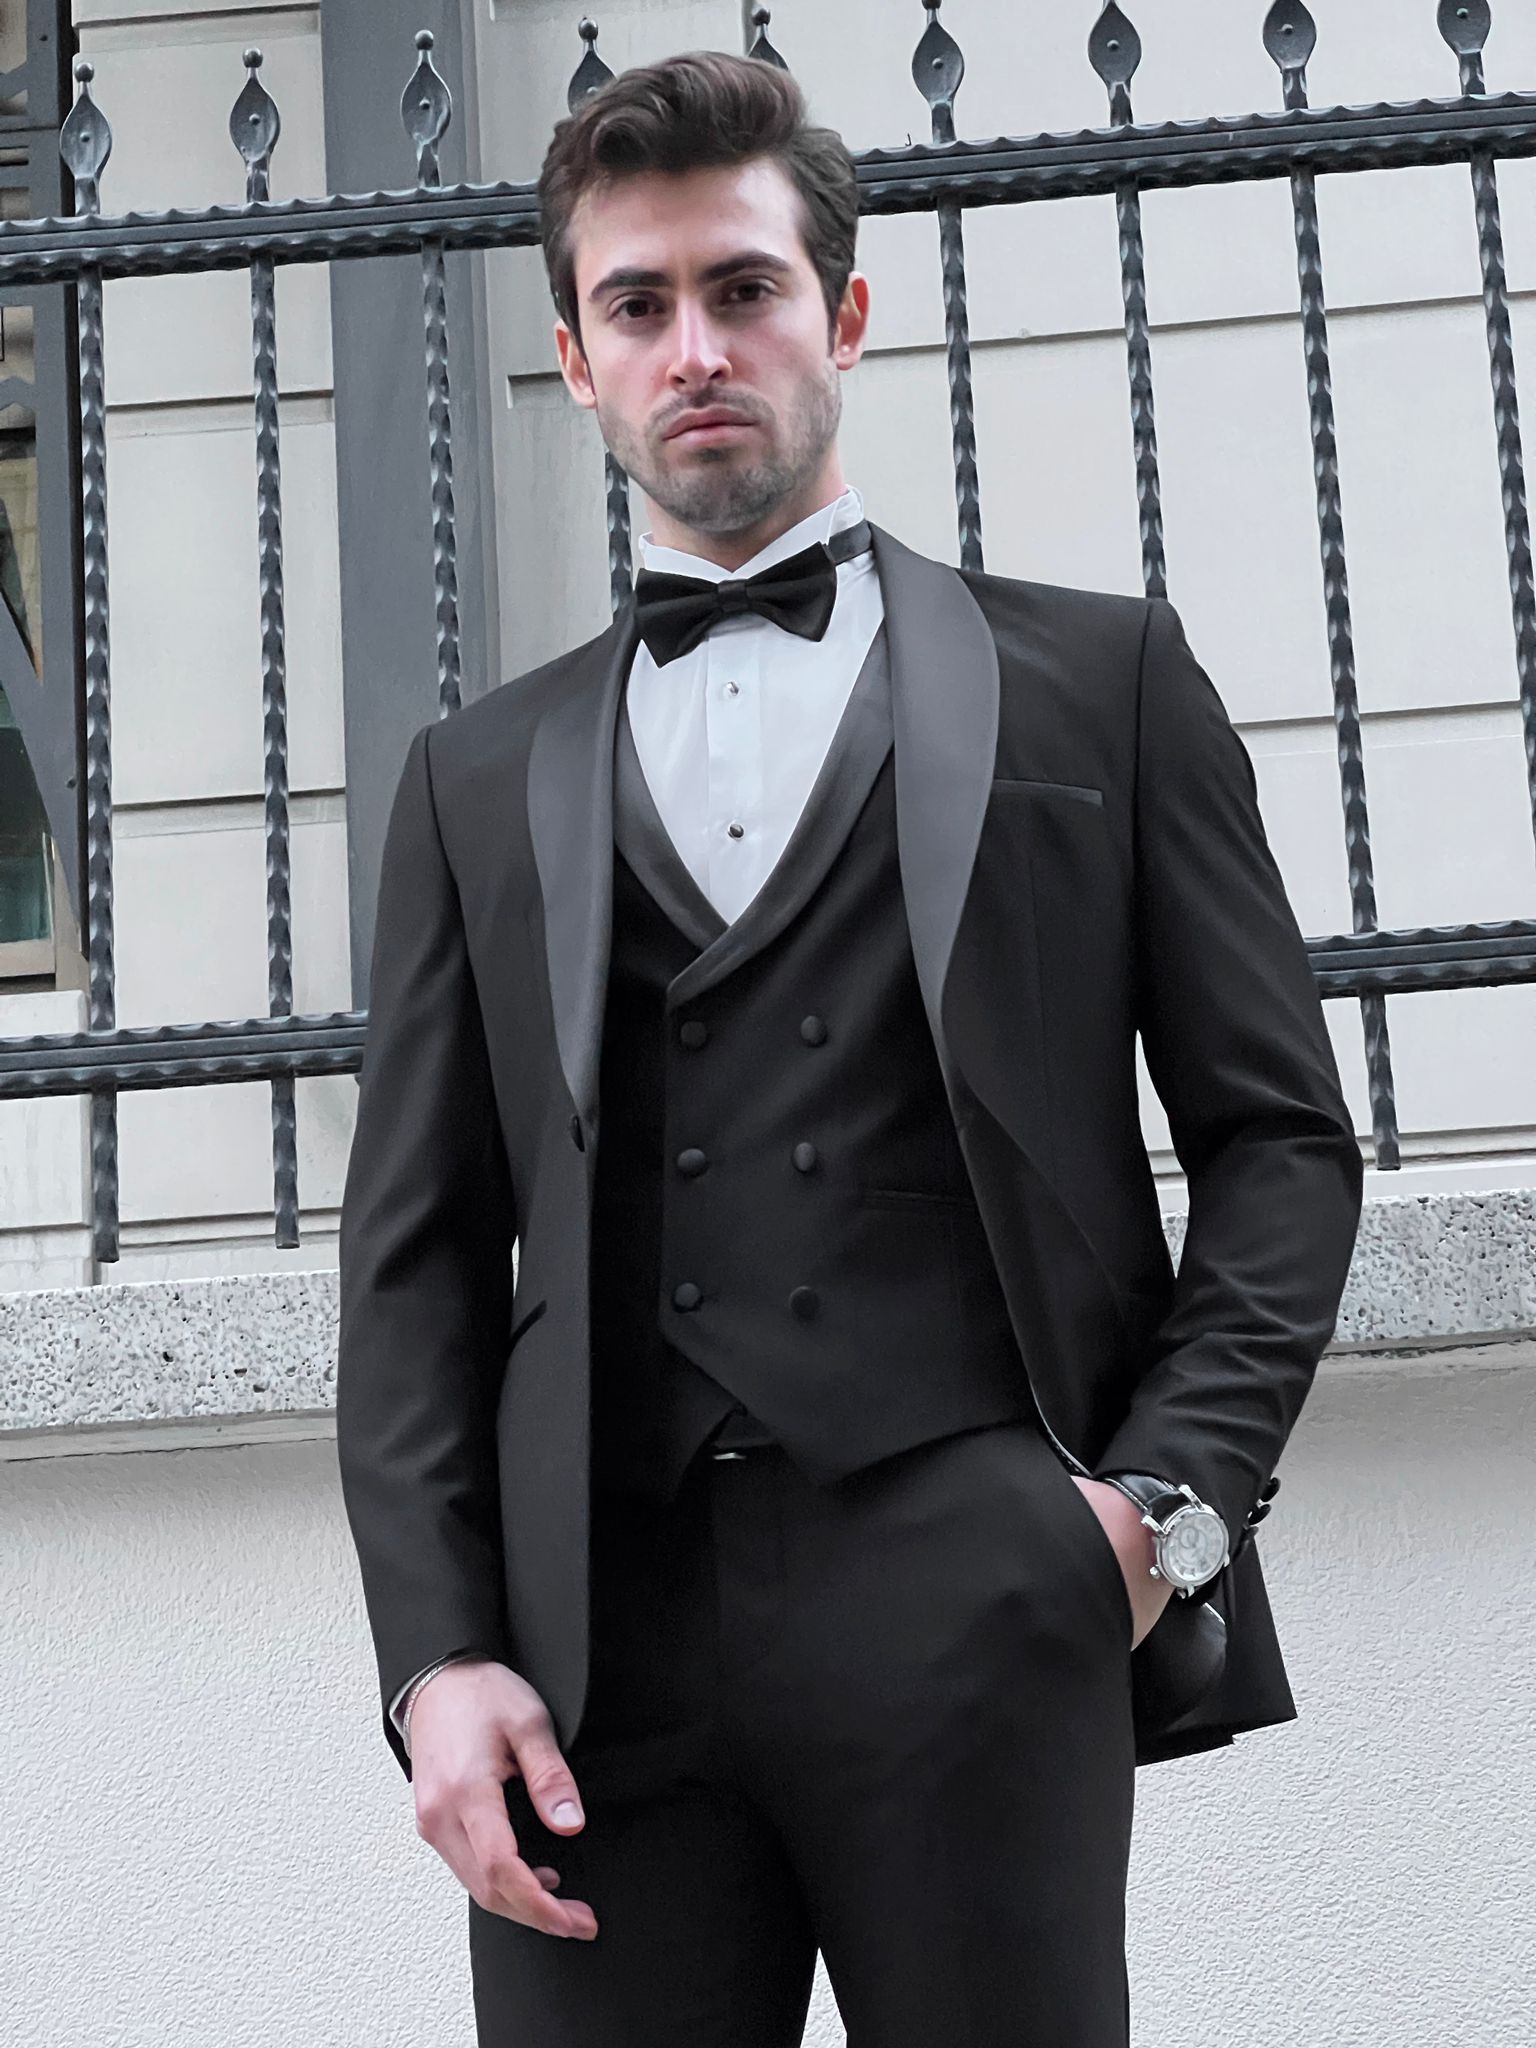 Louis Slim Fit High Quality Shawl Collared Black Party Tuxedo